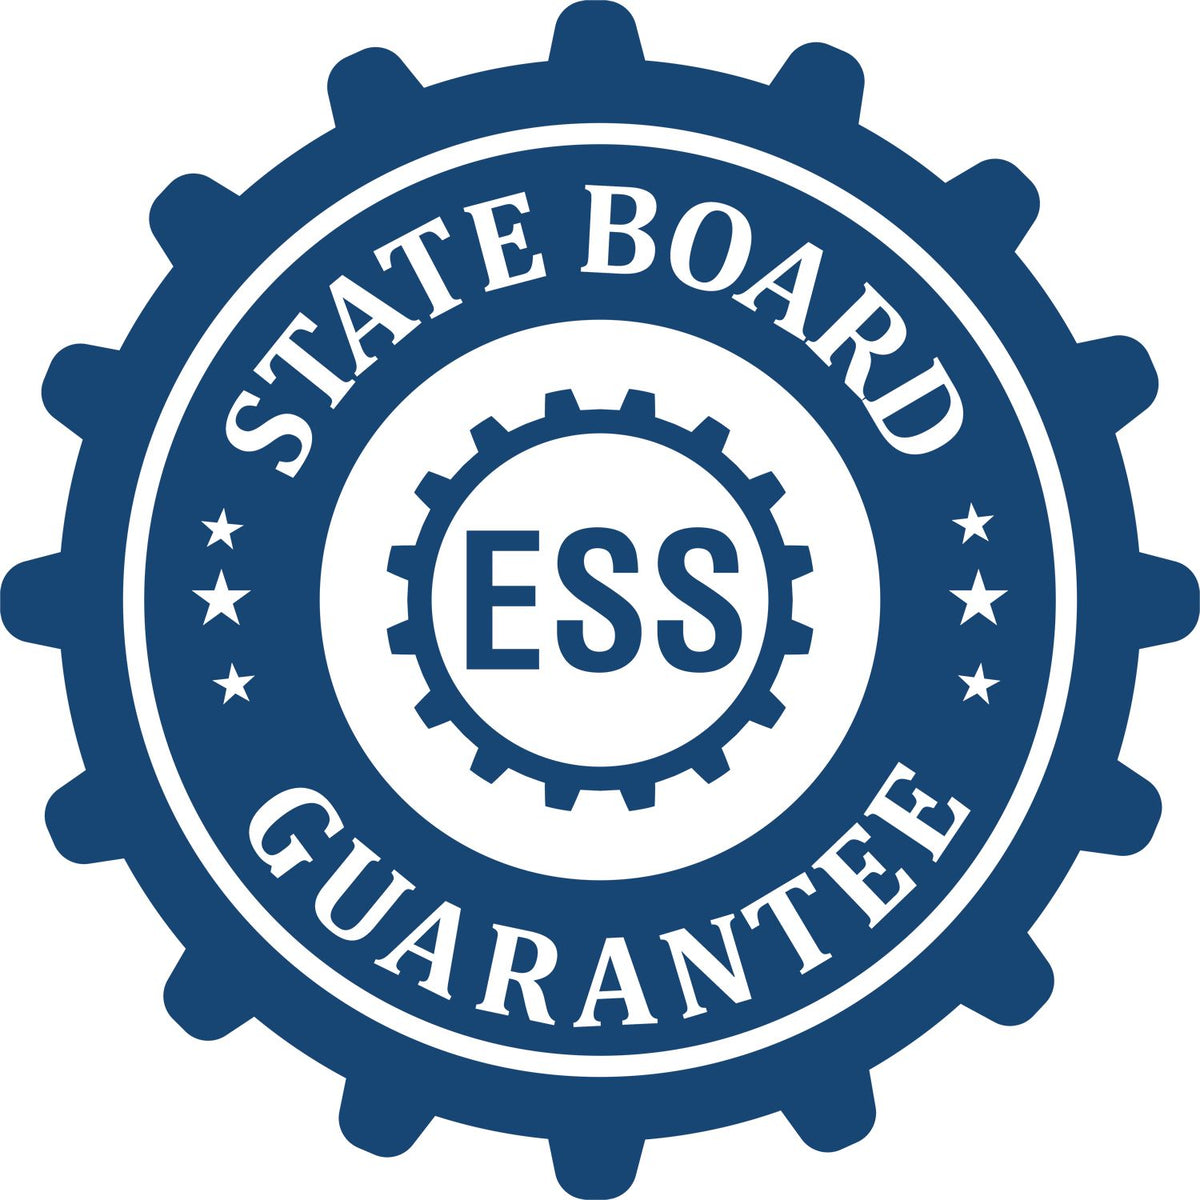 An emblem in a gear shape illustrating a state board guarantee for the New Jersey Professional Geologist Seal Stamp